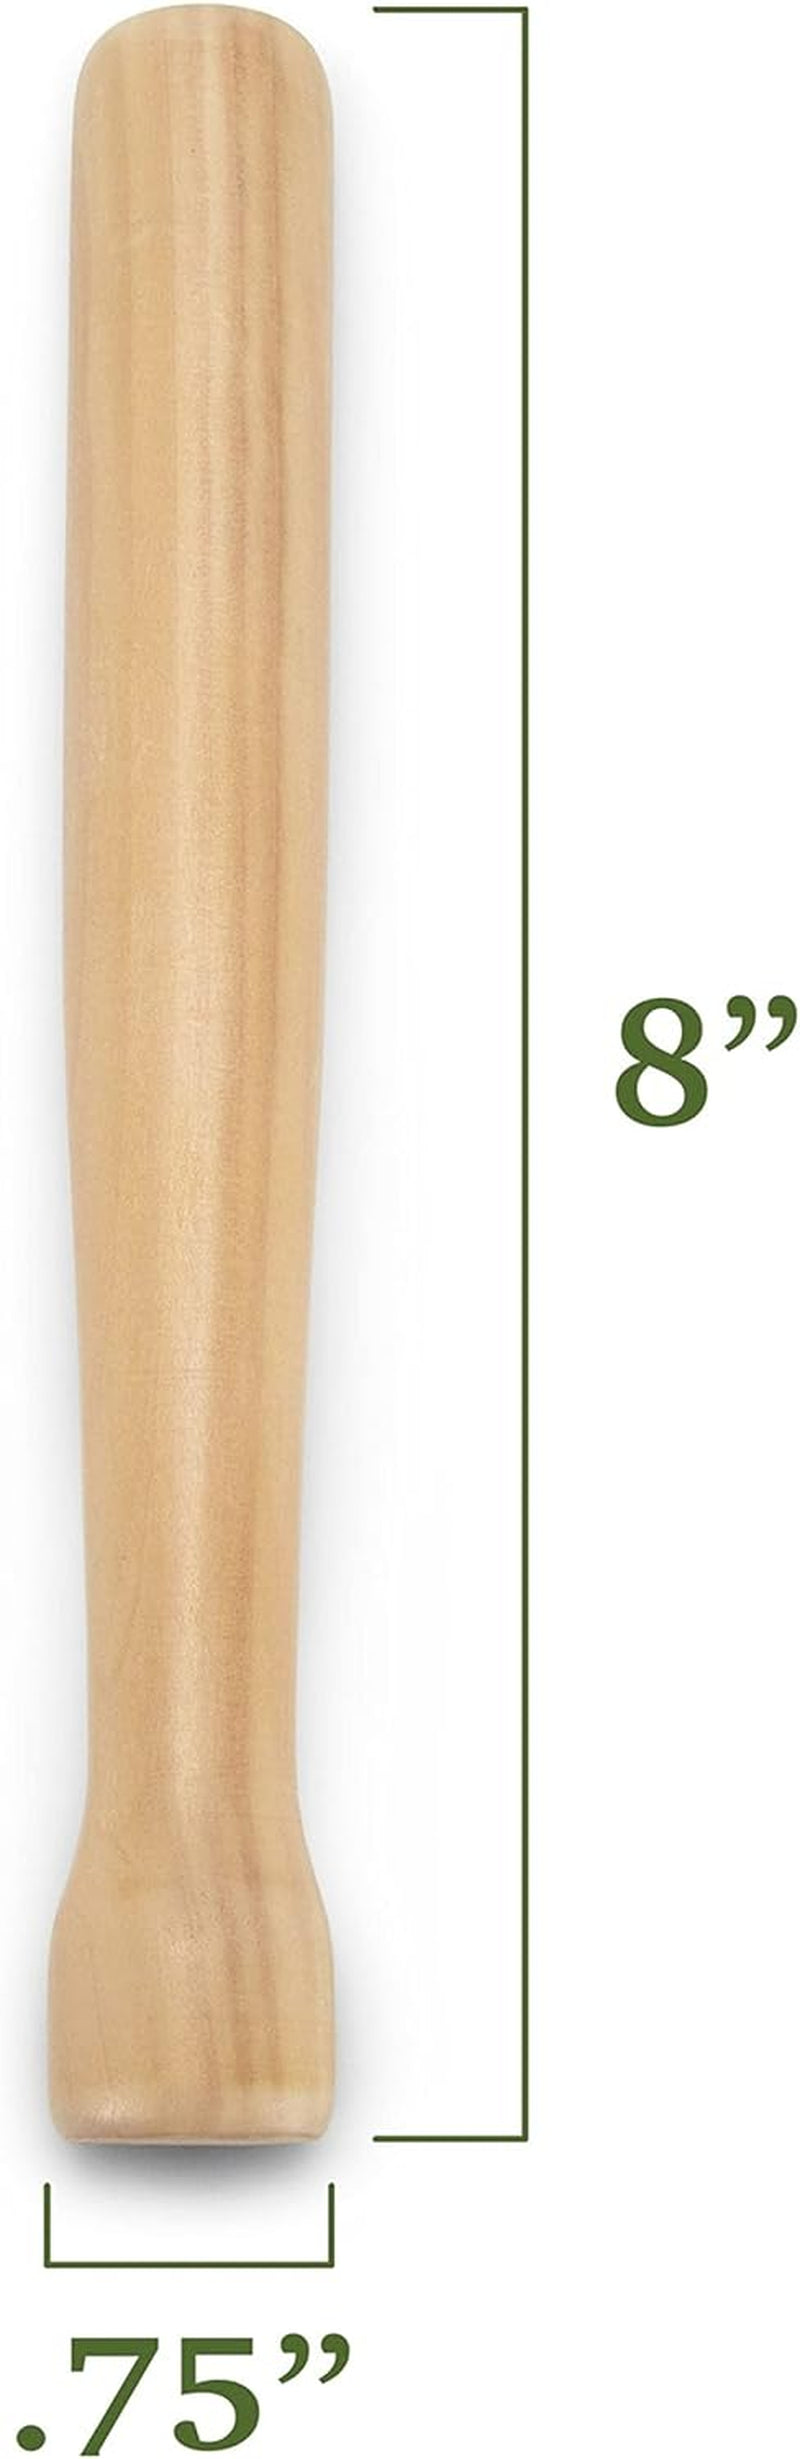 8” Wooden Cocktail Muddler - Wood Bar Supplies & Accessories for Herb & Fruit Mixing, Drinks, Restaurants, Home Kitchens, Shaker Sets & Cocktail Kits